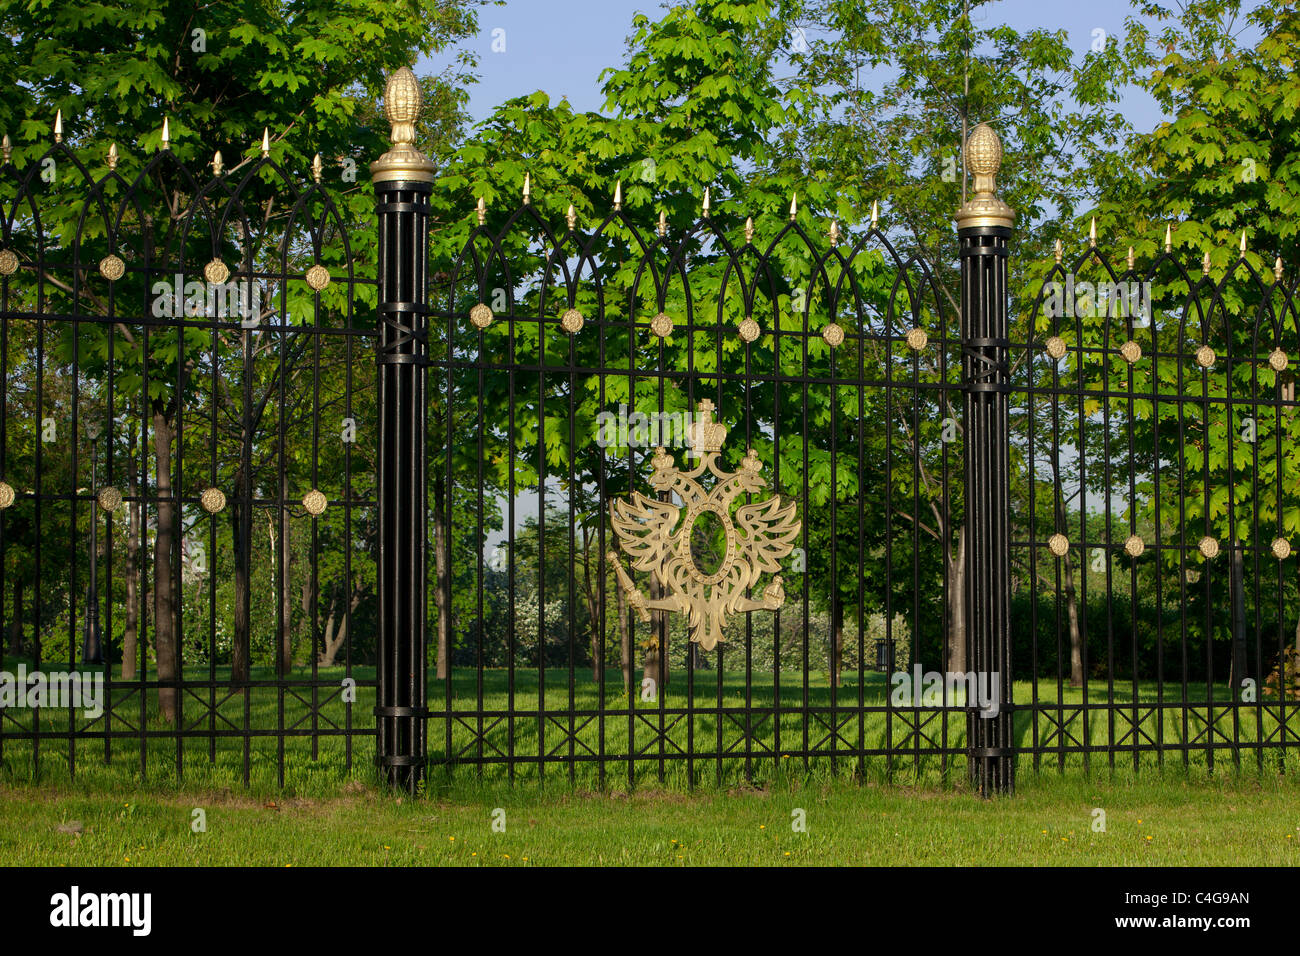 The coat of arms of Russia on the fence of the 18th century Neo-Gothic (Gothic Revival) Tsaritsyno Palace in Moscow, Russia Stock Photo